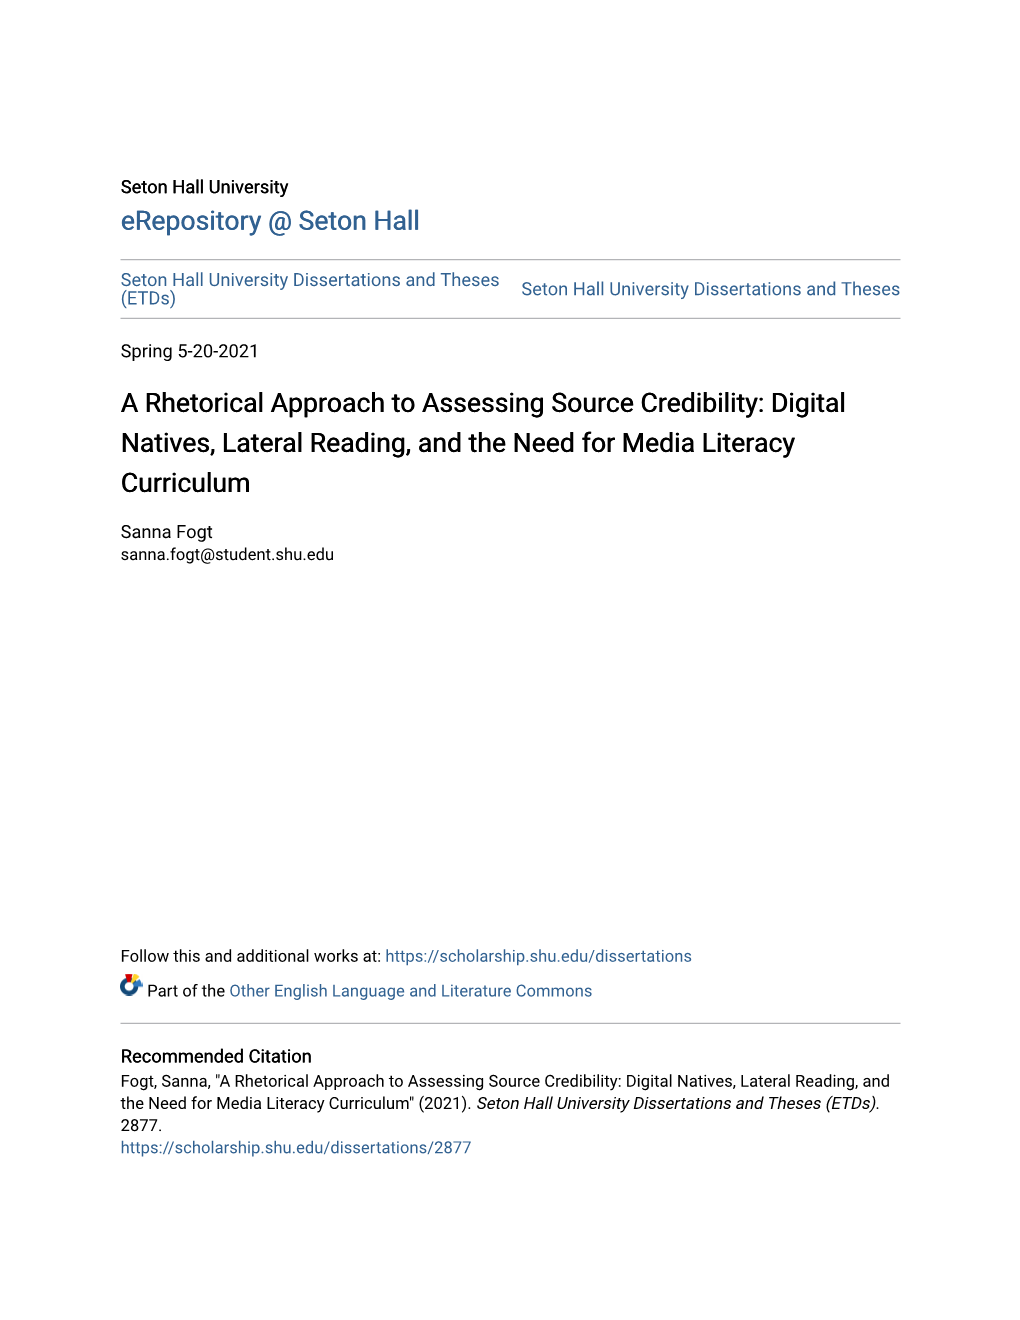 A Rhetorical Approach to Assessing Source Credibility: Digital Natives, Lateral Reading, and the Need for Media Literacy Curriculum